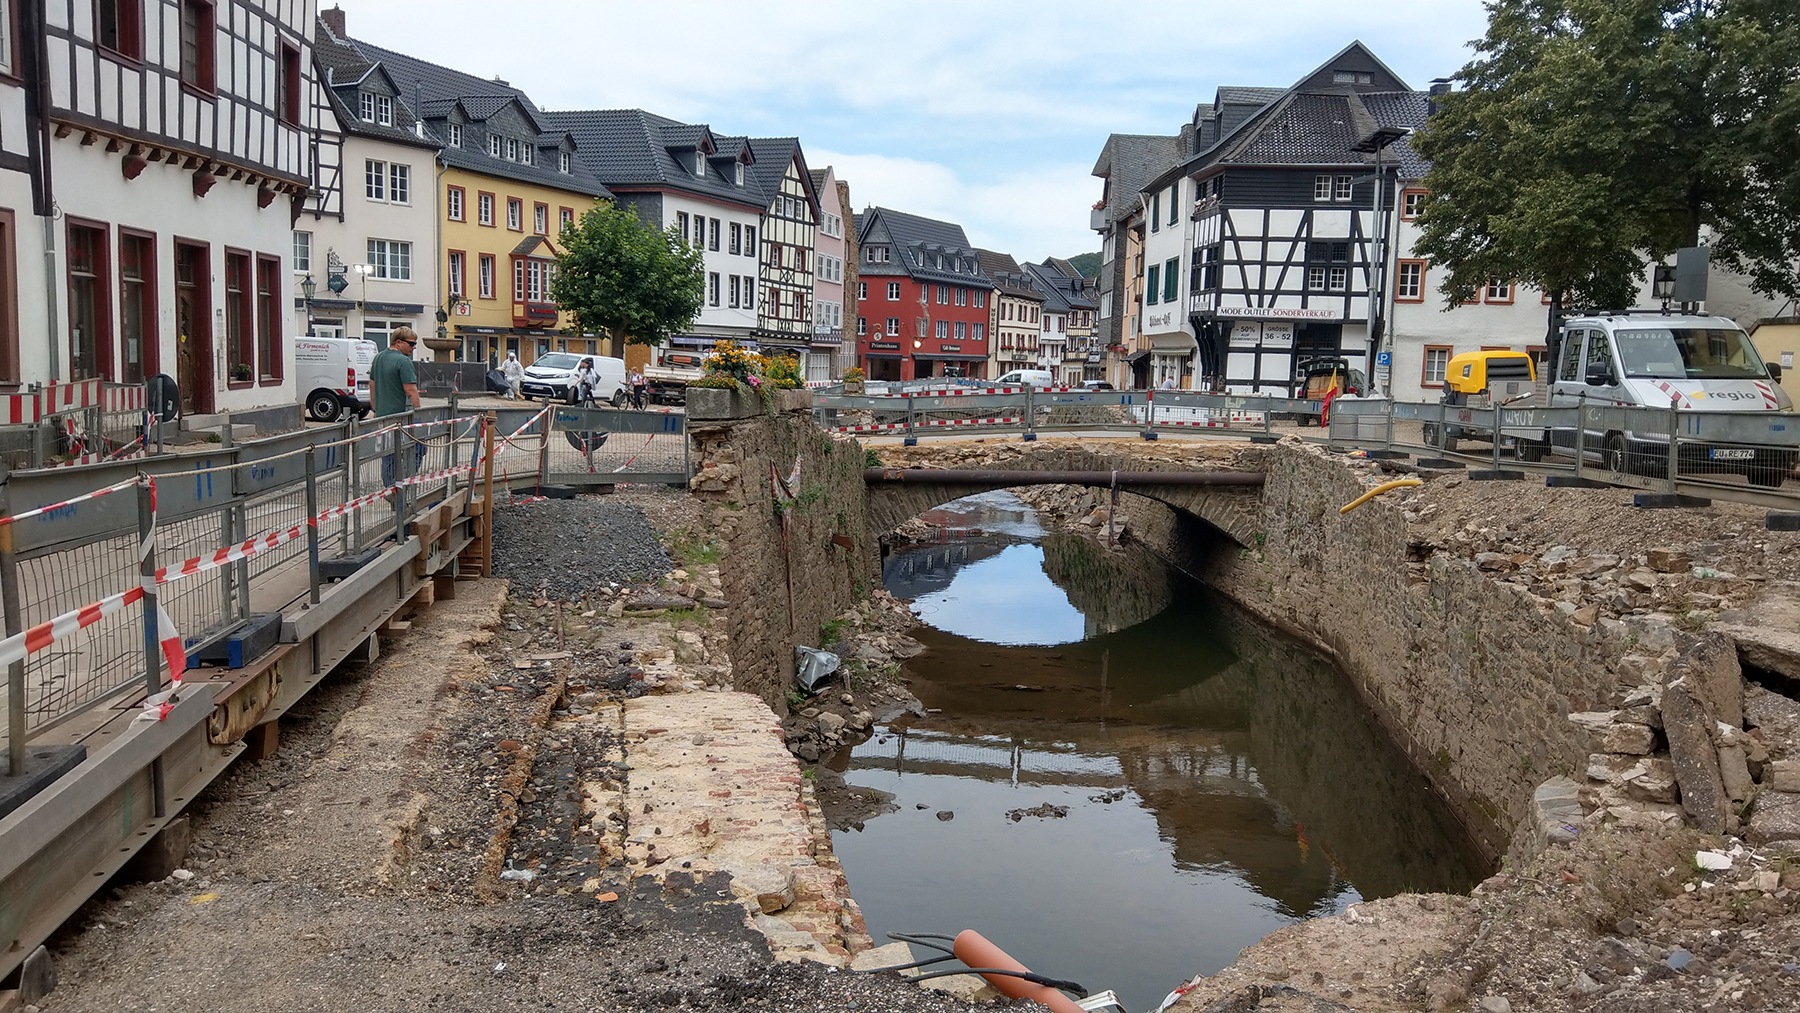 During the Ahr River flood, bridges acted as chokepoints for the flood, damming water and leading to multiple surges of flooding. (Photograph courtesy of University of Göttingen/Michael Dietze)